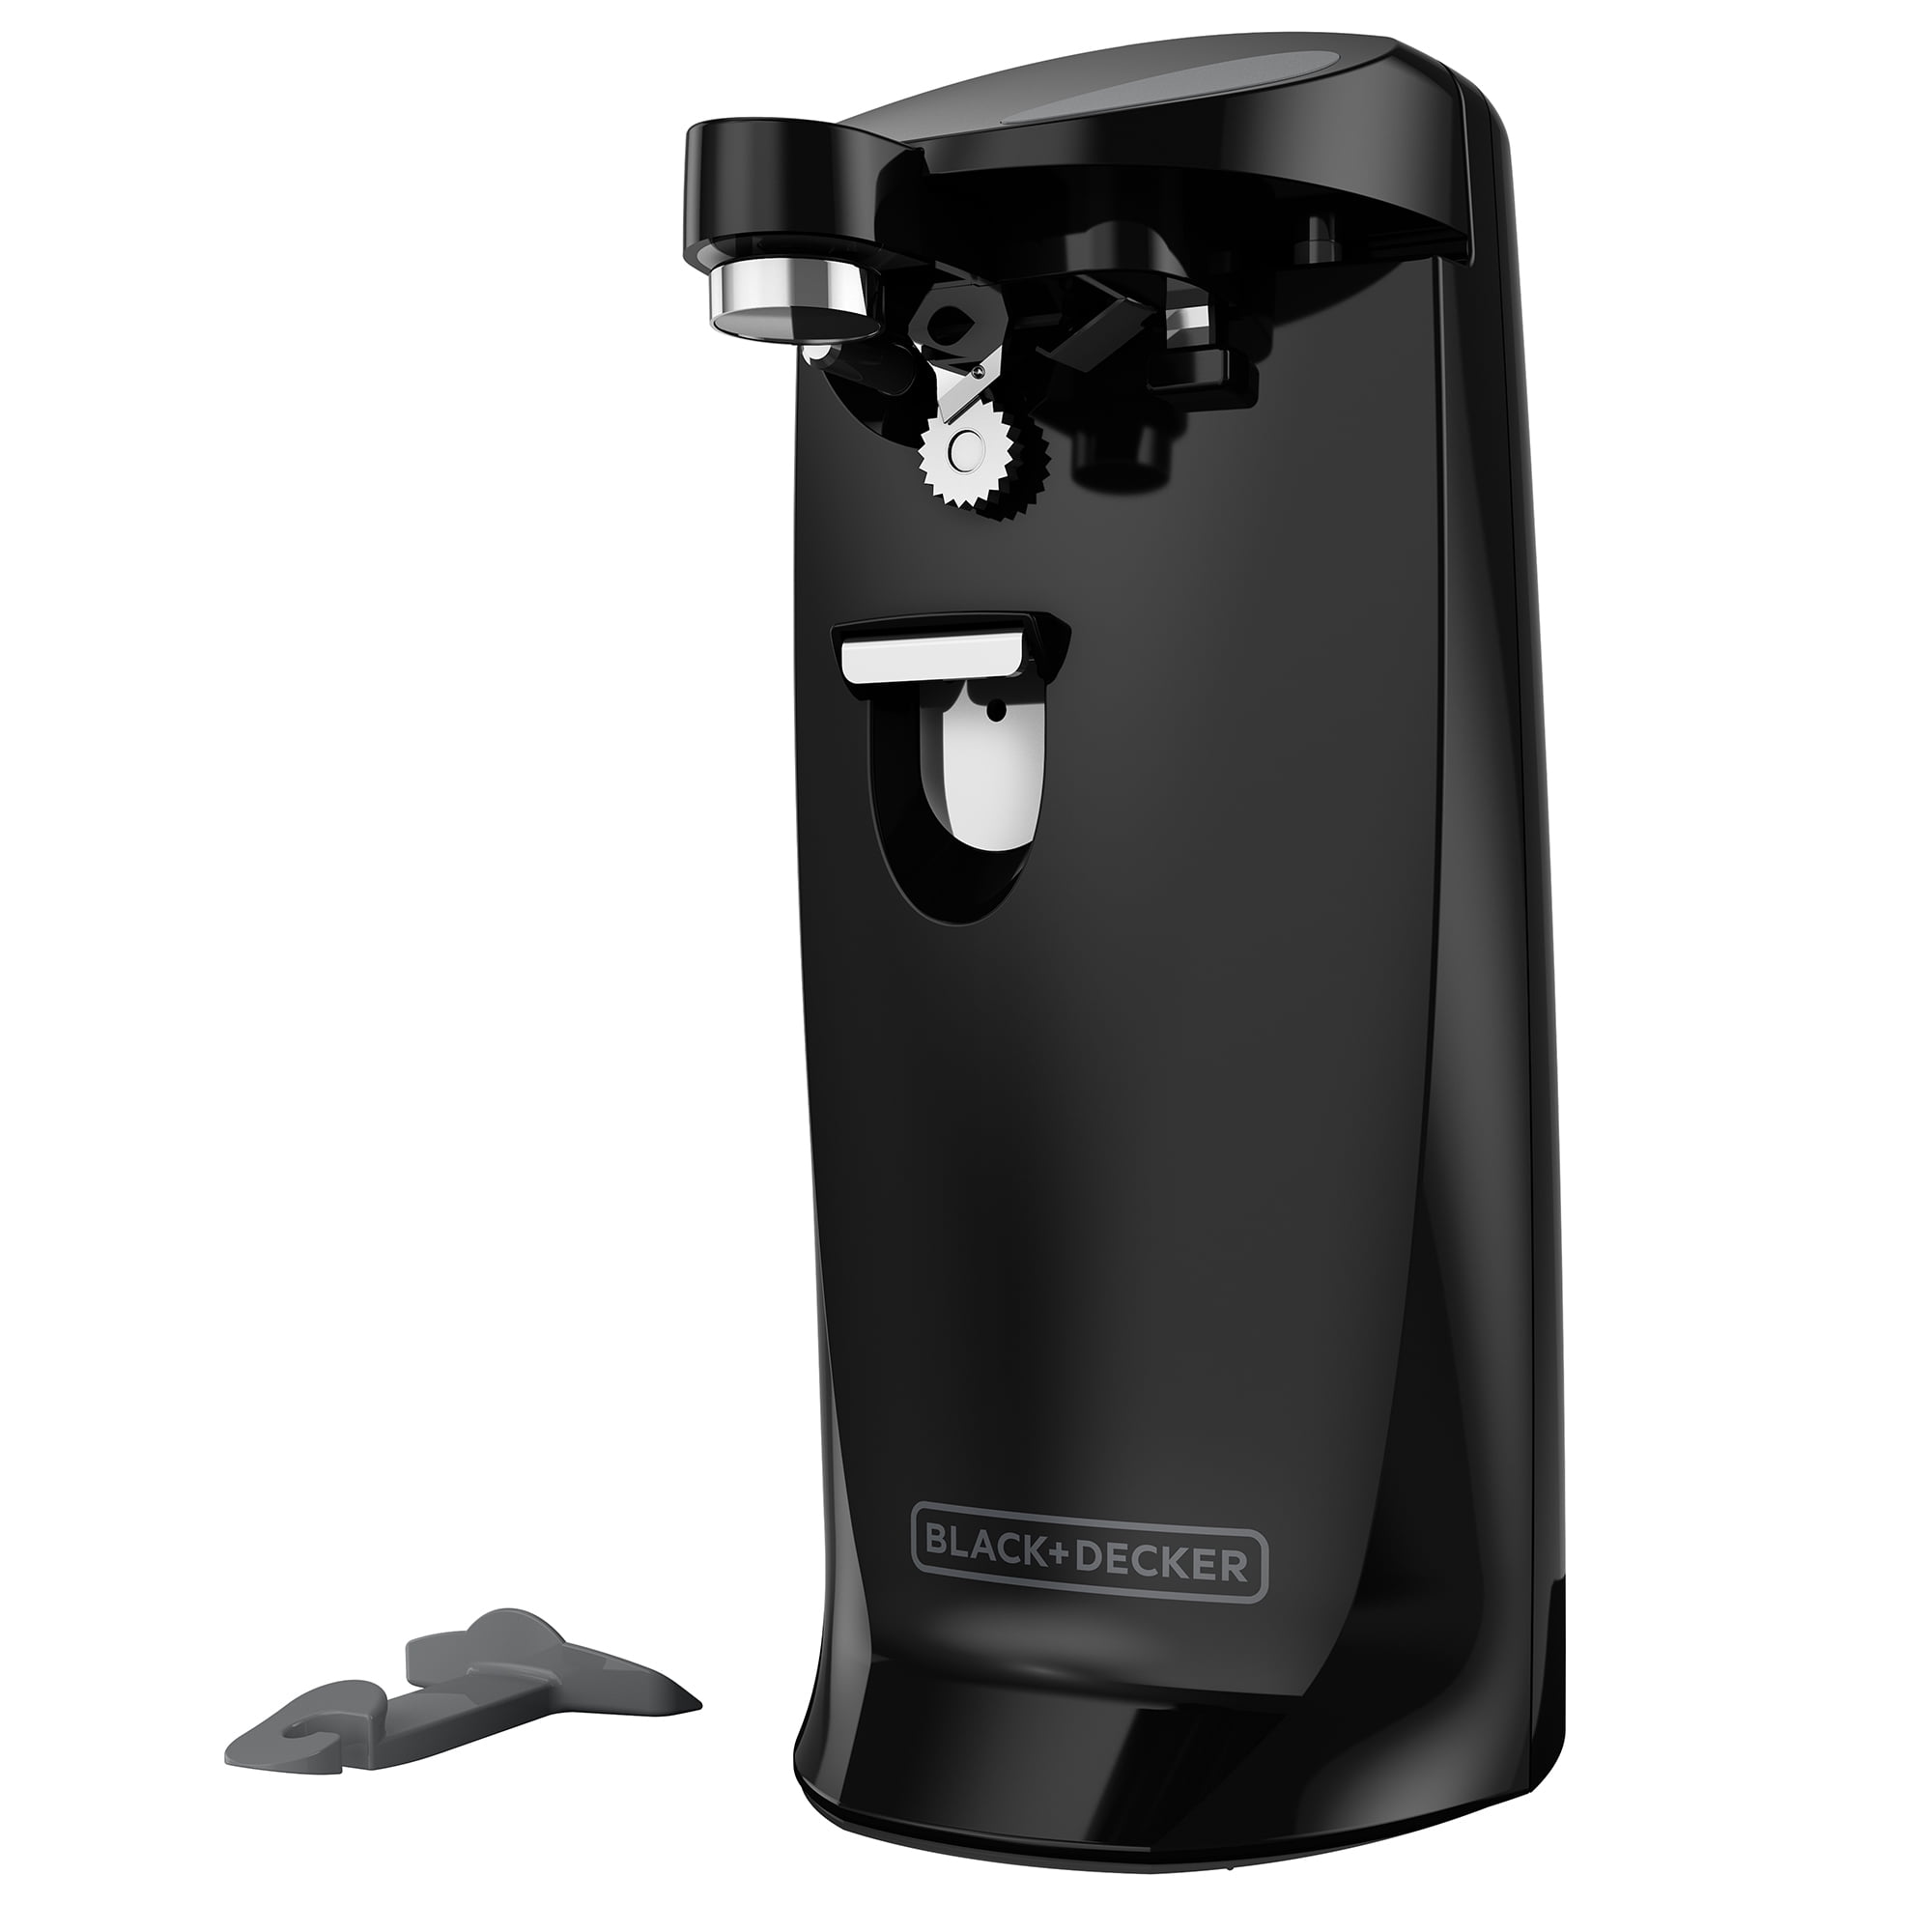  BLACK+DECKER EasyCut Extra-Tall Can Opener with Knife Sharpener  and Bottle Opener, Black, EC500B-T : Home & Kitchen